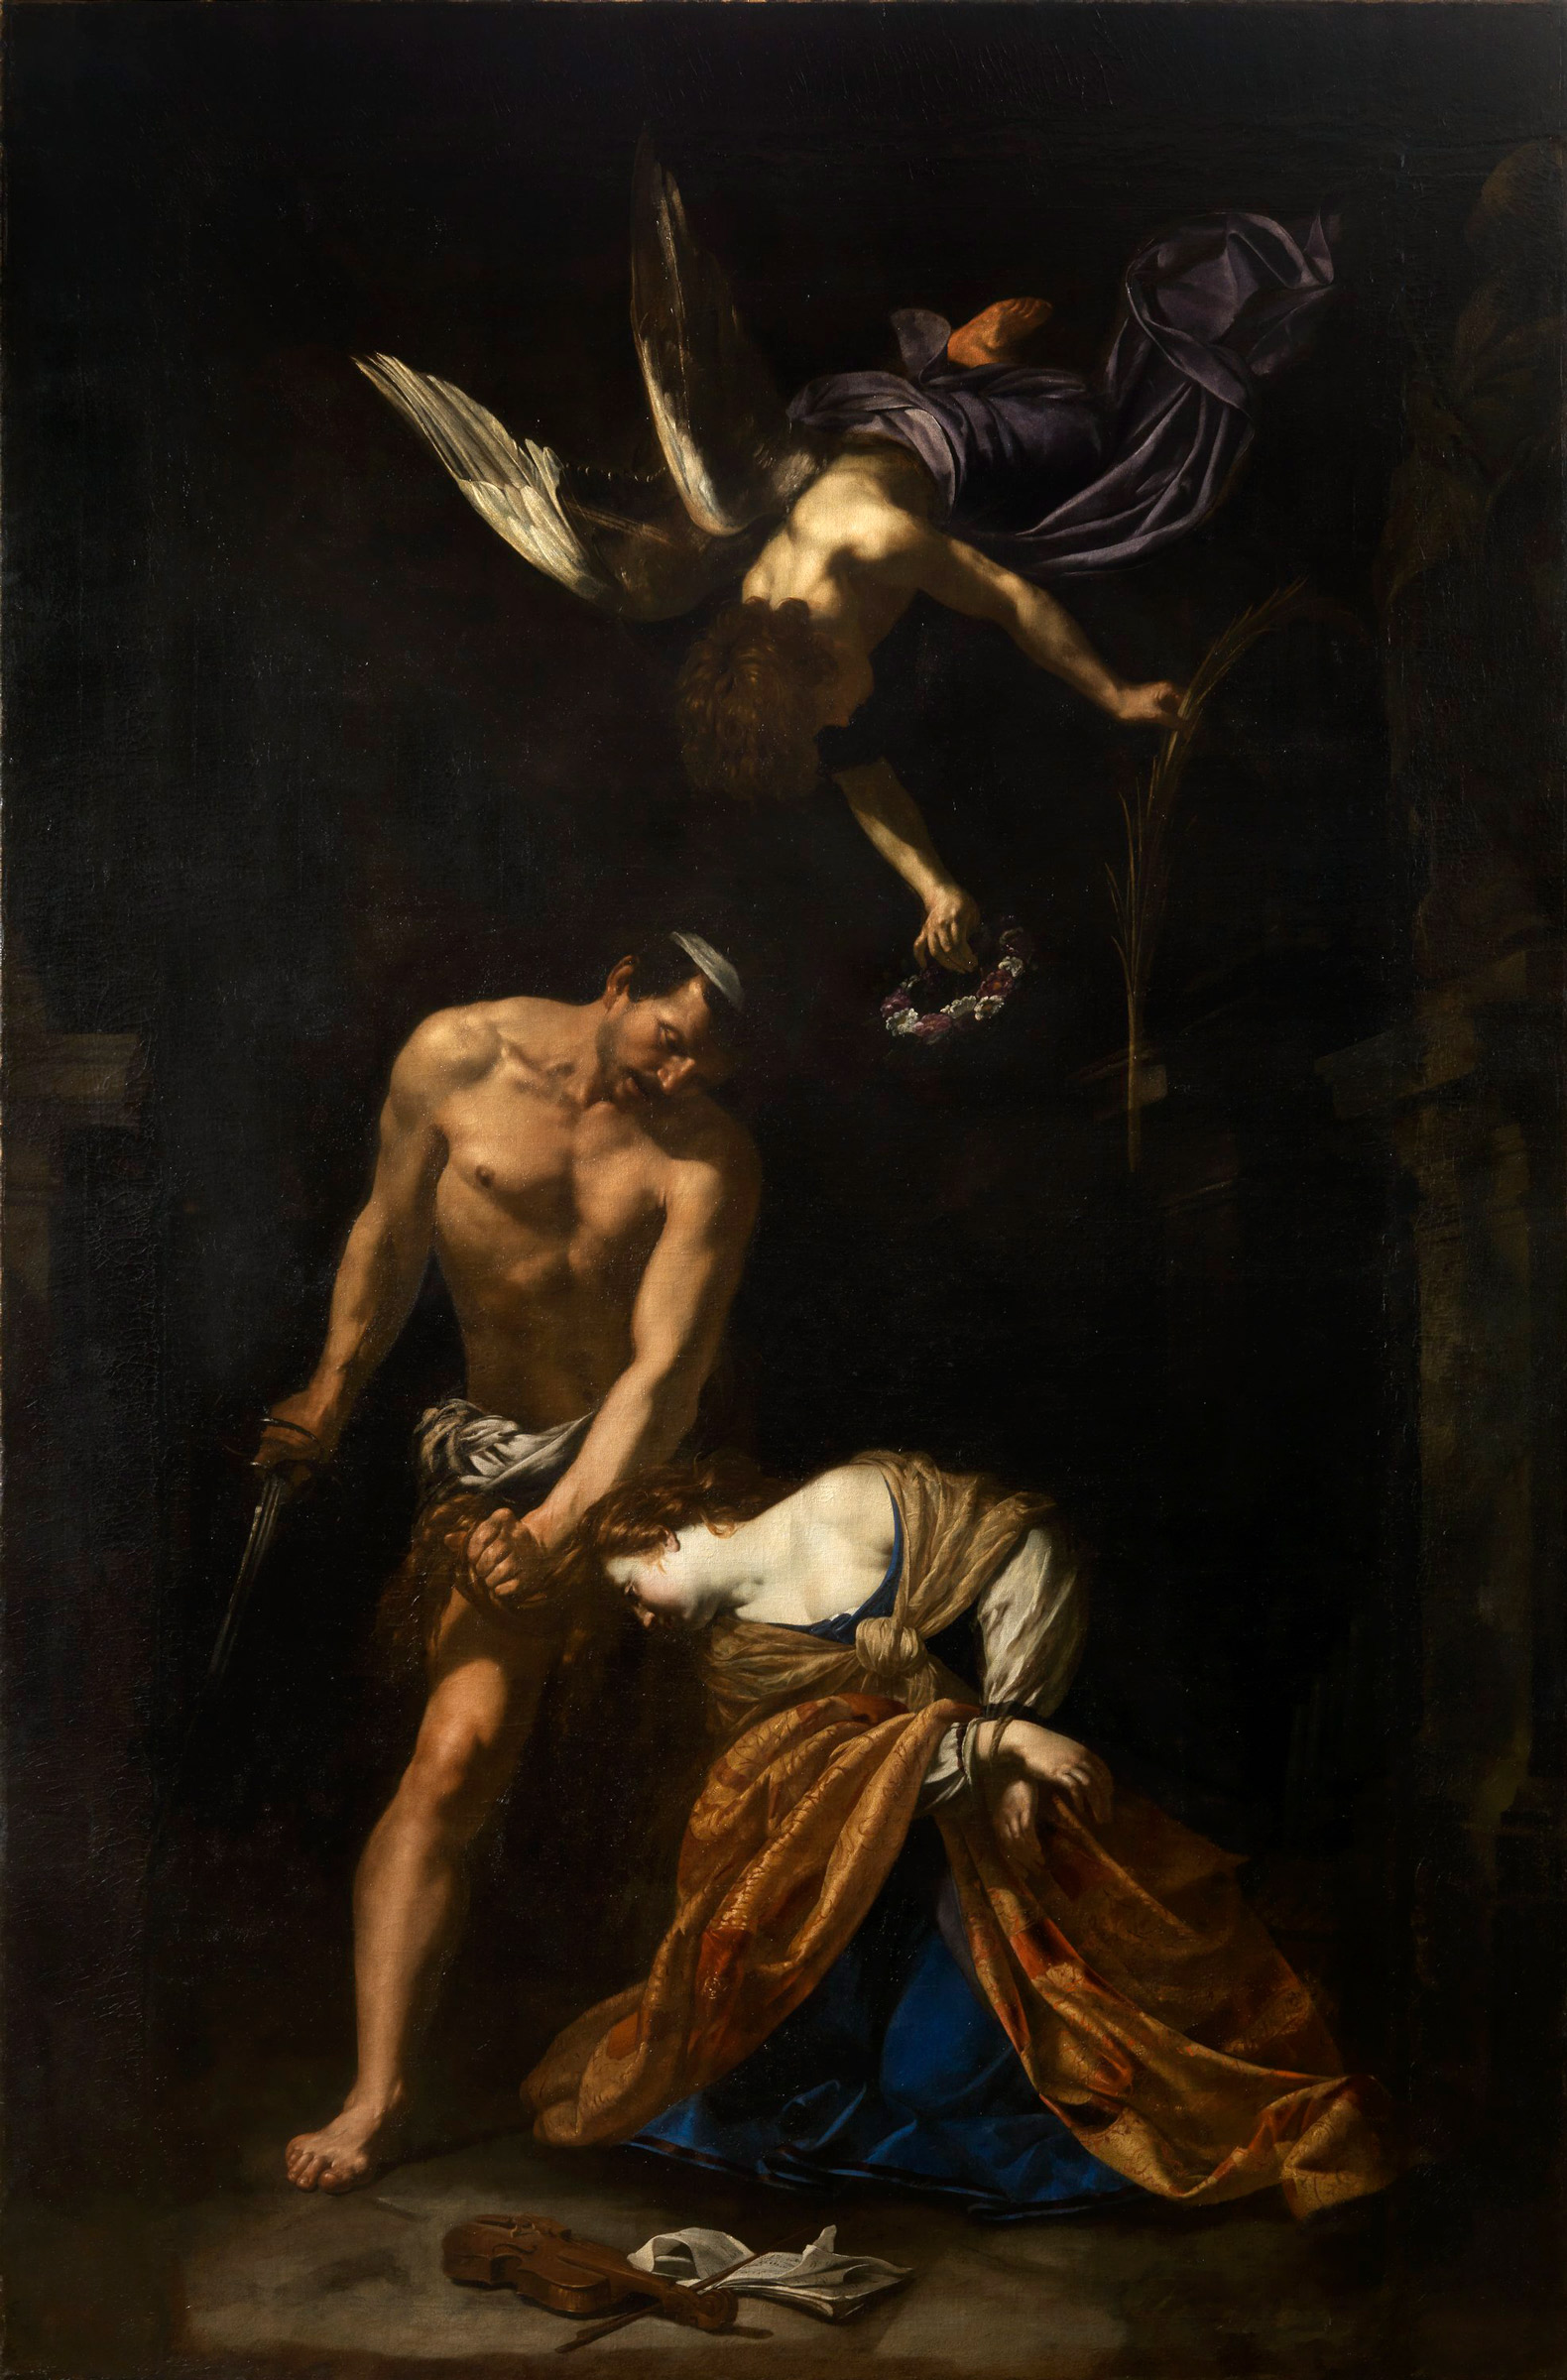 Caravaggio and caravaggeschi in Florence